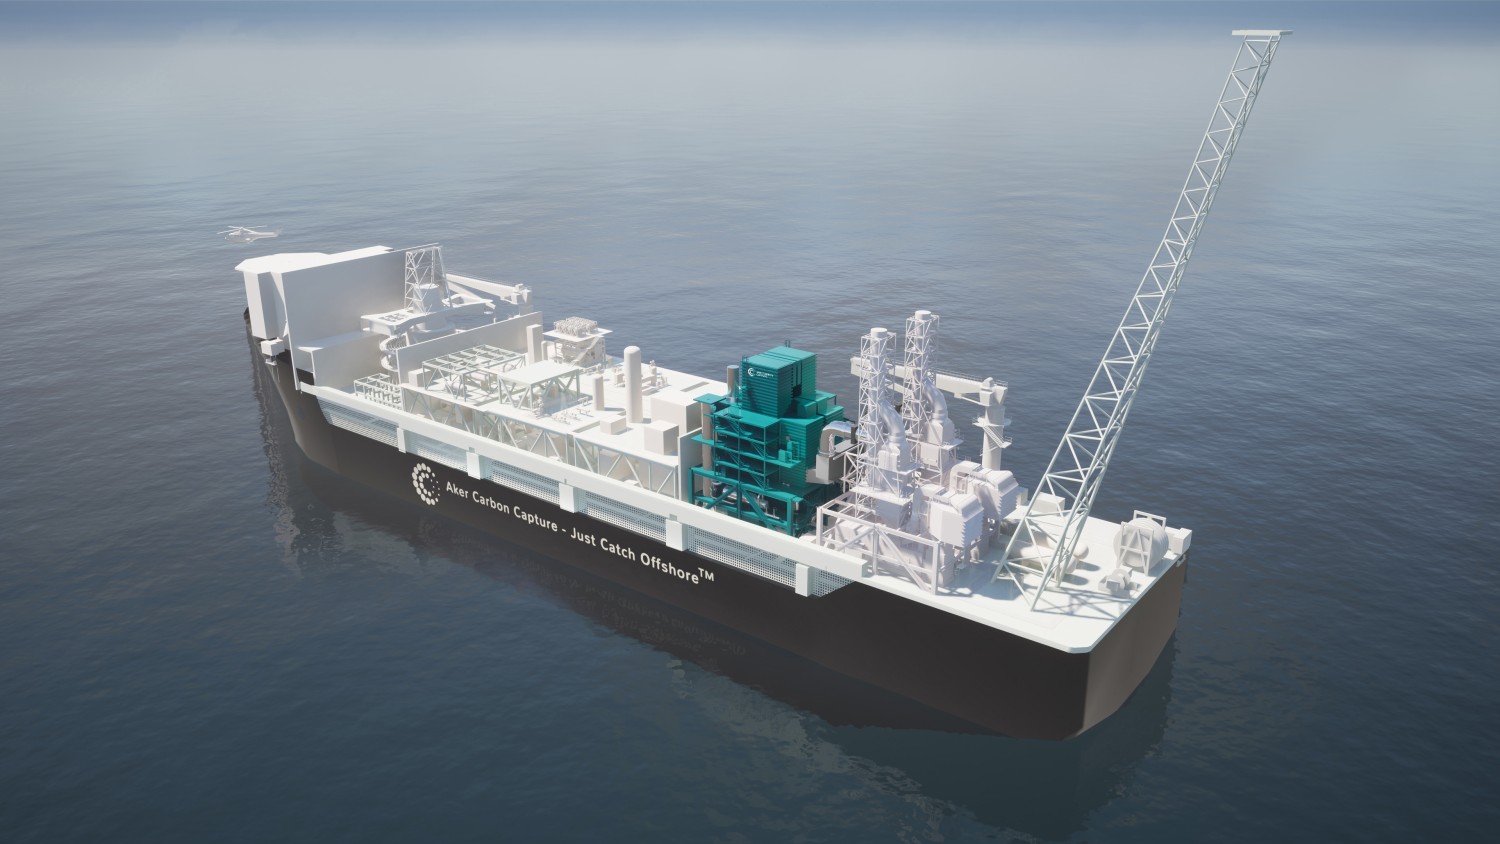 Aker Carbon Capture’s modularized offshore facility wins DNV’s stamp of approval